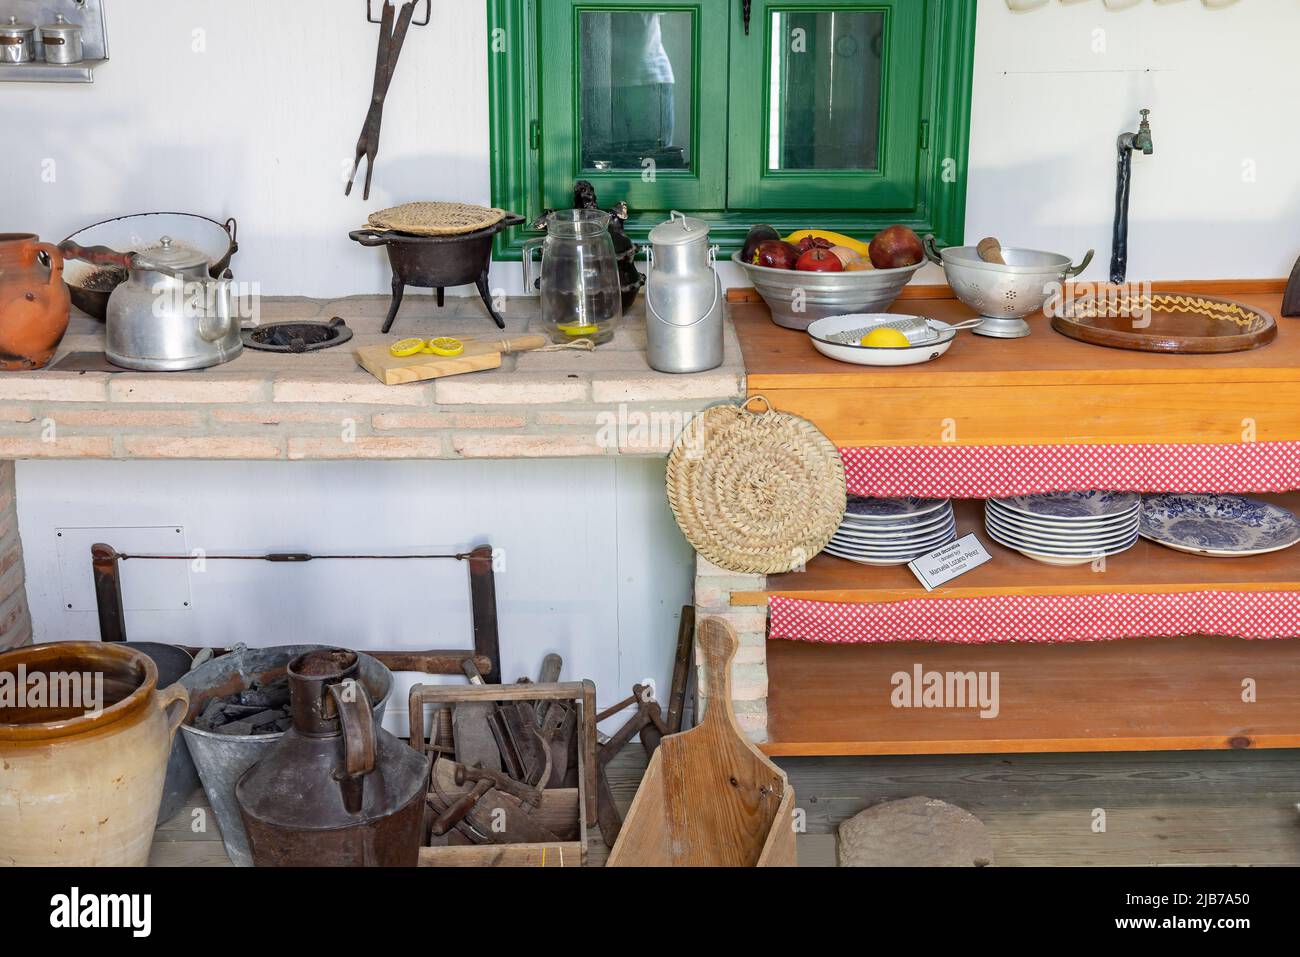 Punta Umbria, Huelva, Spain - April 27, 2022: Old kitchen Inside of a english summer house in Punta Umbria, build in the late nineteenth century Stock Photo